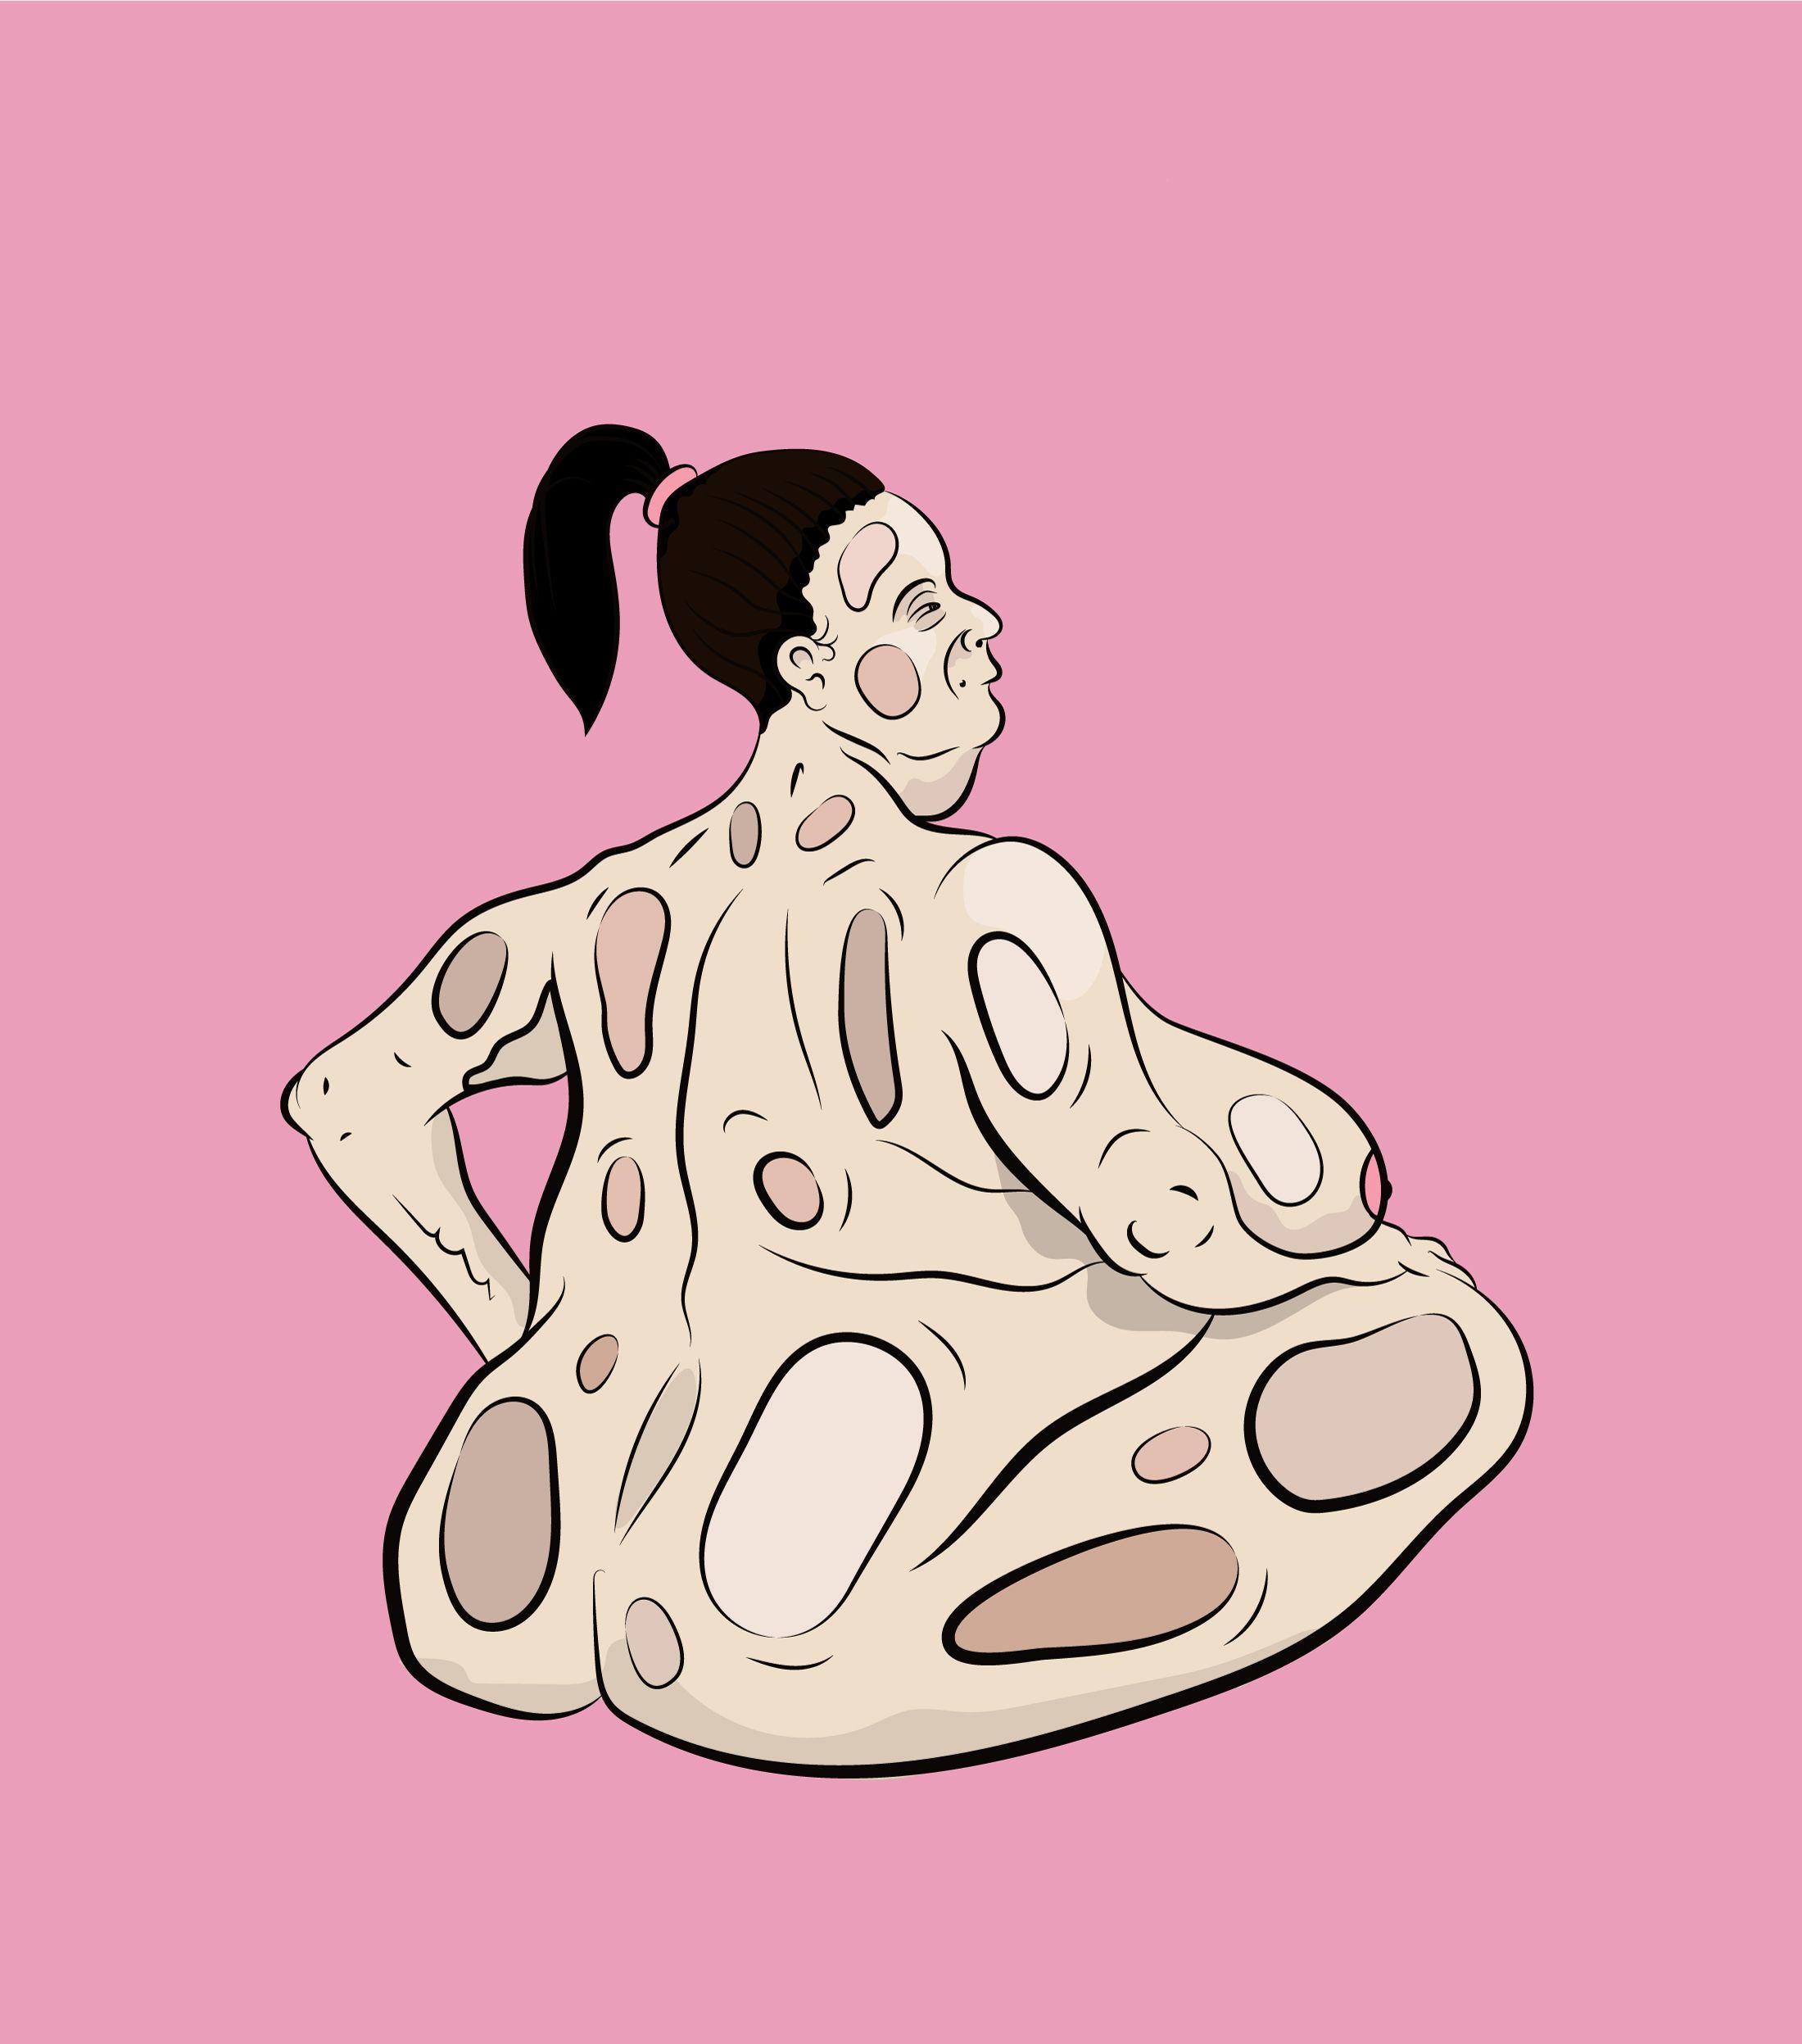 Digital art illustration of a naked, obese lady sat on the floor with her back to us. The subject sits with her back to us, casst against a pink background.